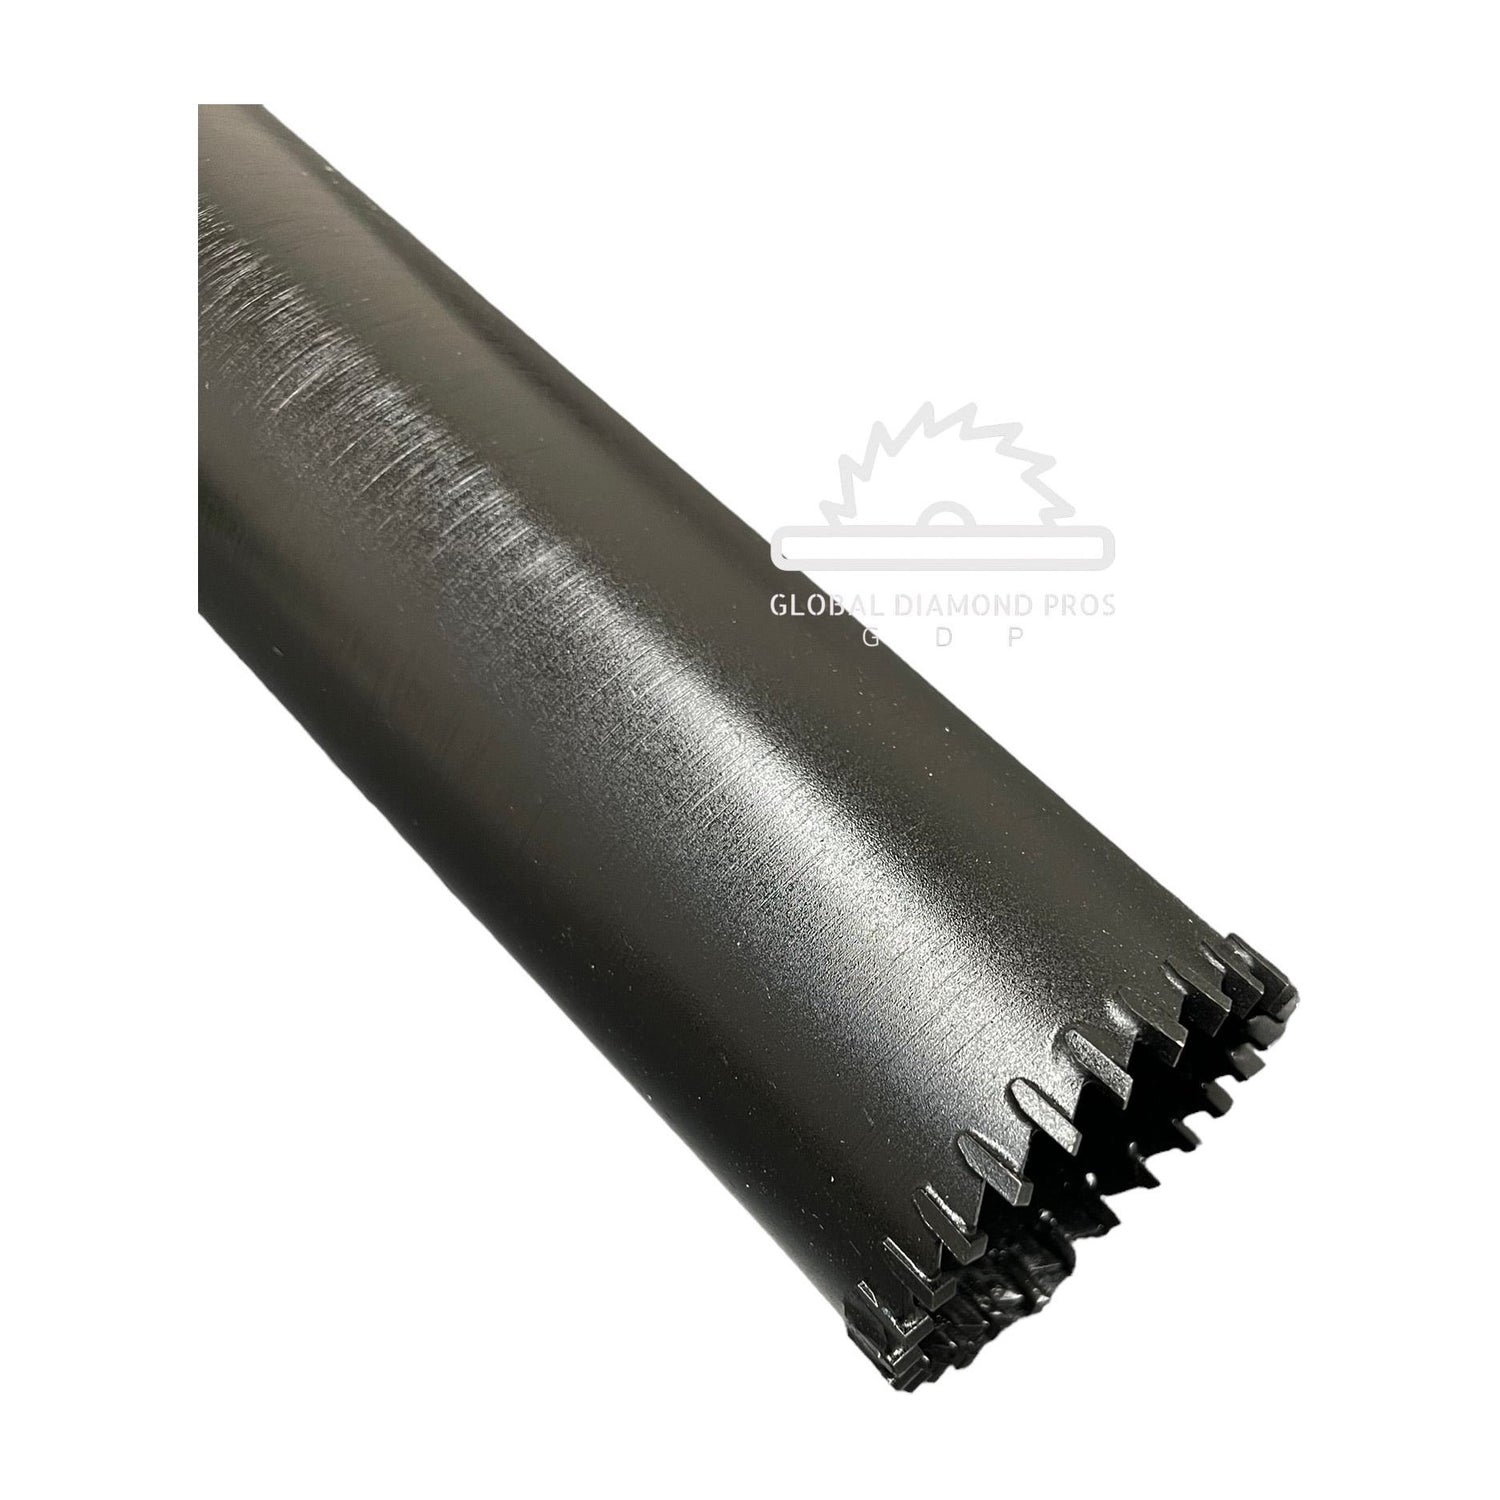 Designed to cut through rebar or plate steel after a diamond core bit has drilled through the concrete Carbide inserts are brazed into the core barrel. These specialized bits must be used with water to keep the bit cool while drilling in steel 13” Standard core length